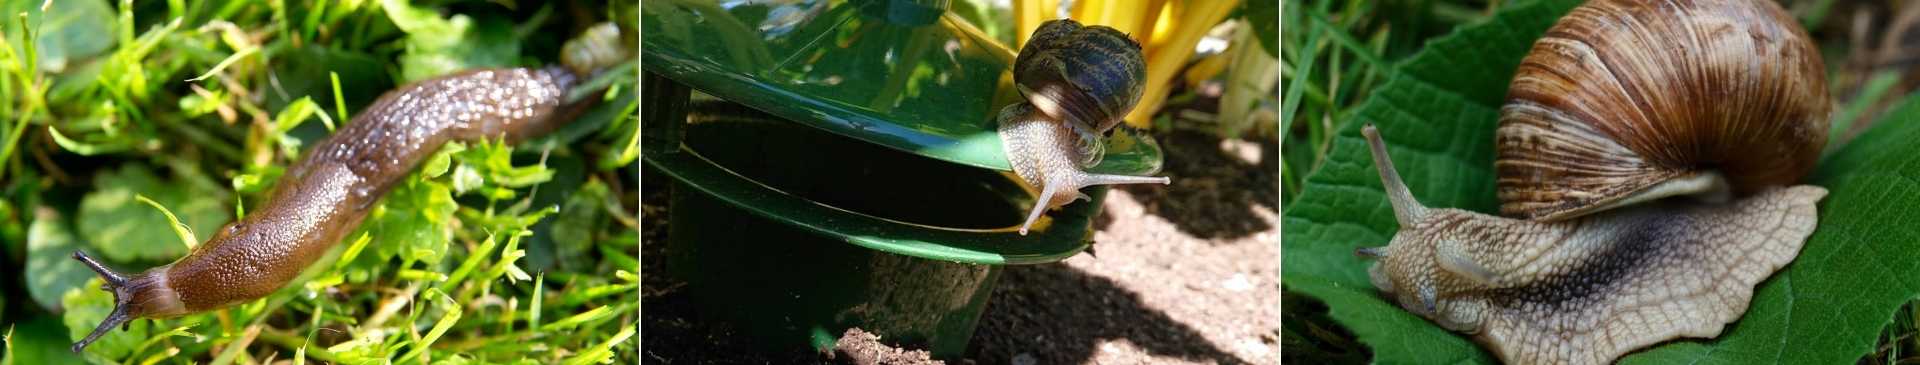 Dealing with Slugs and Snails: The Gardener's Scourge 